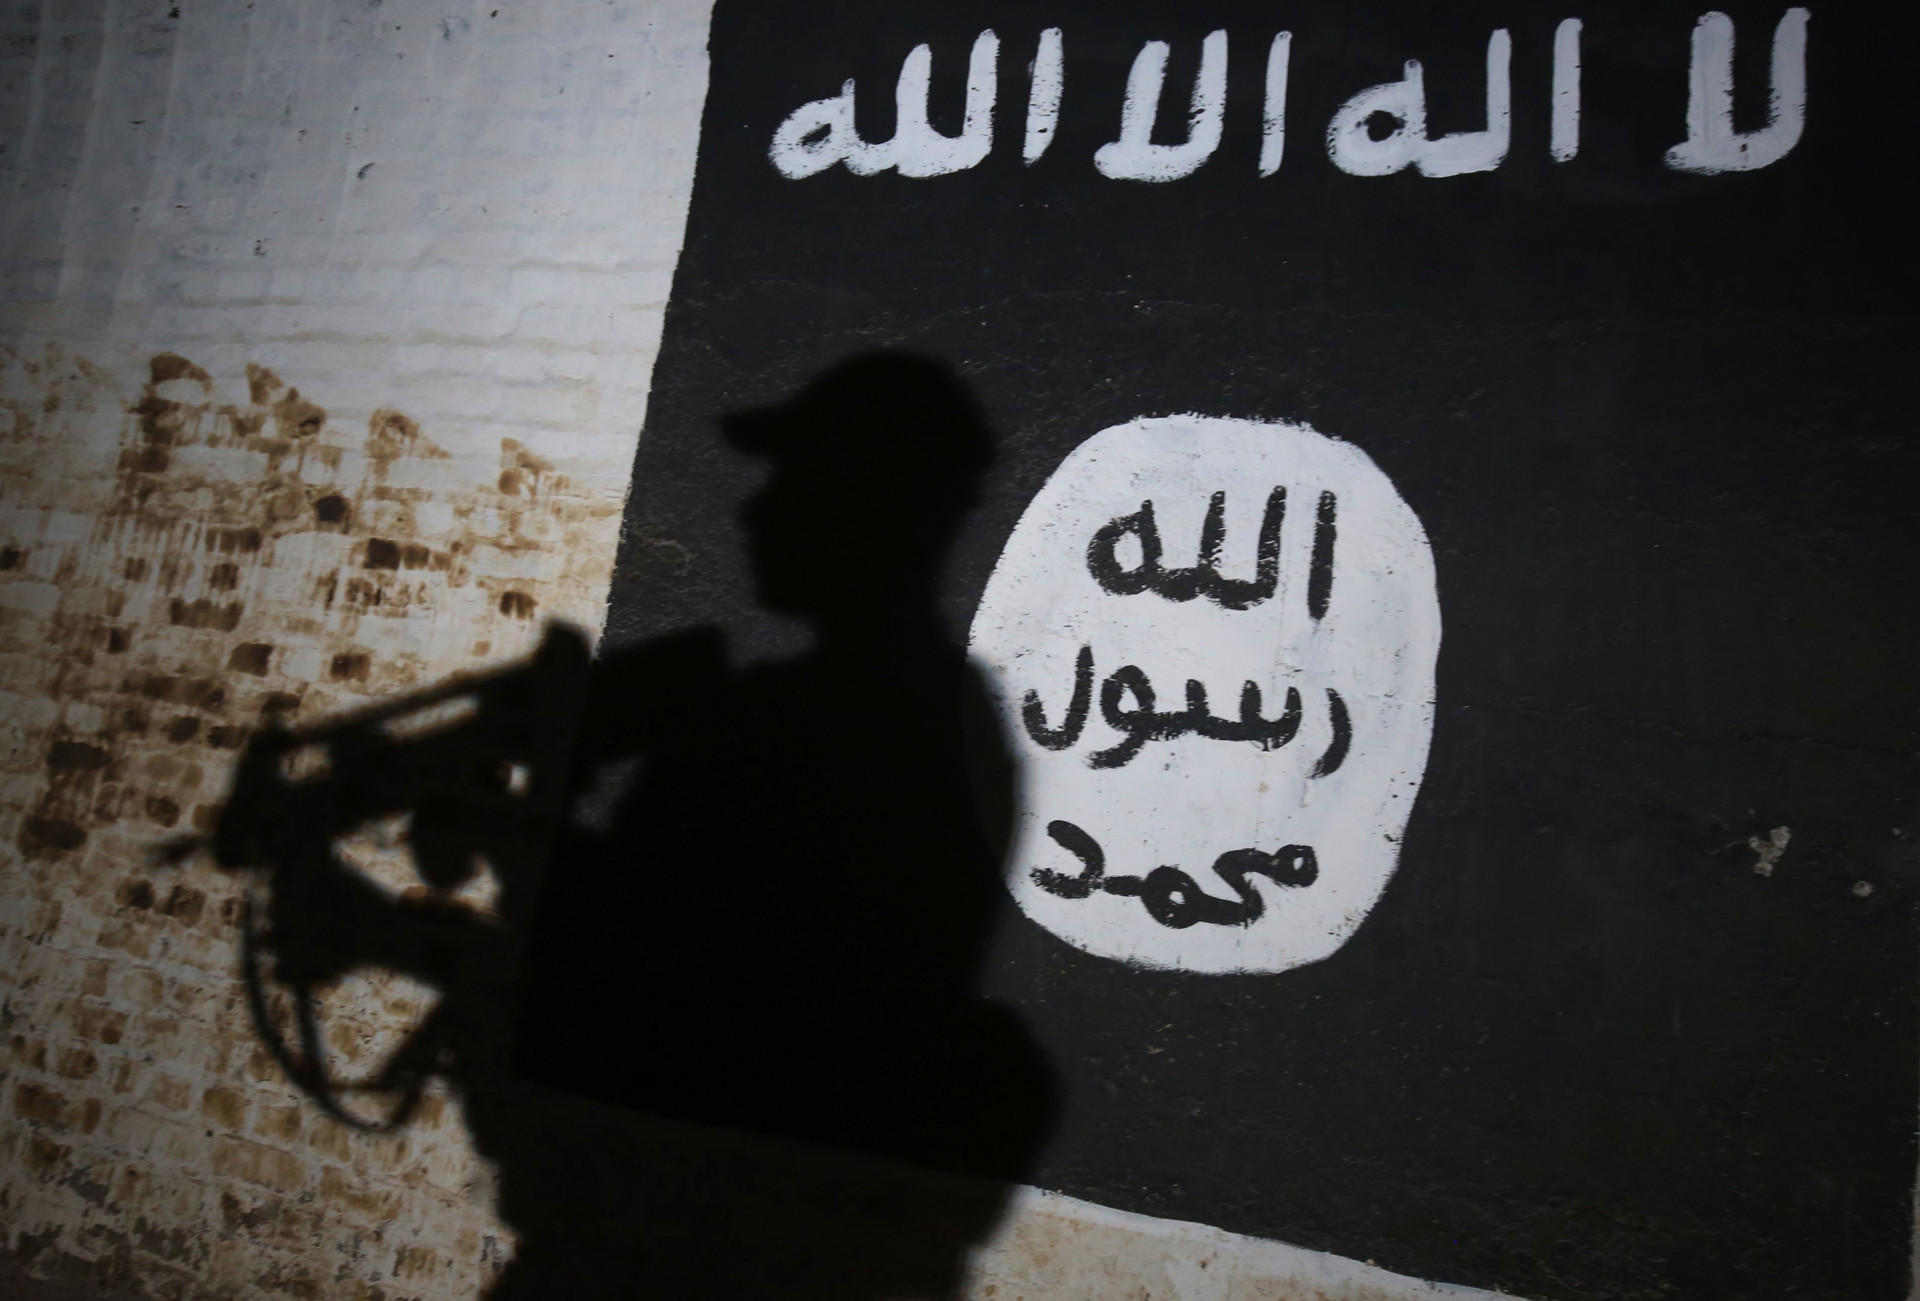 The Hoax in the ISIS Flag